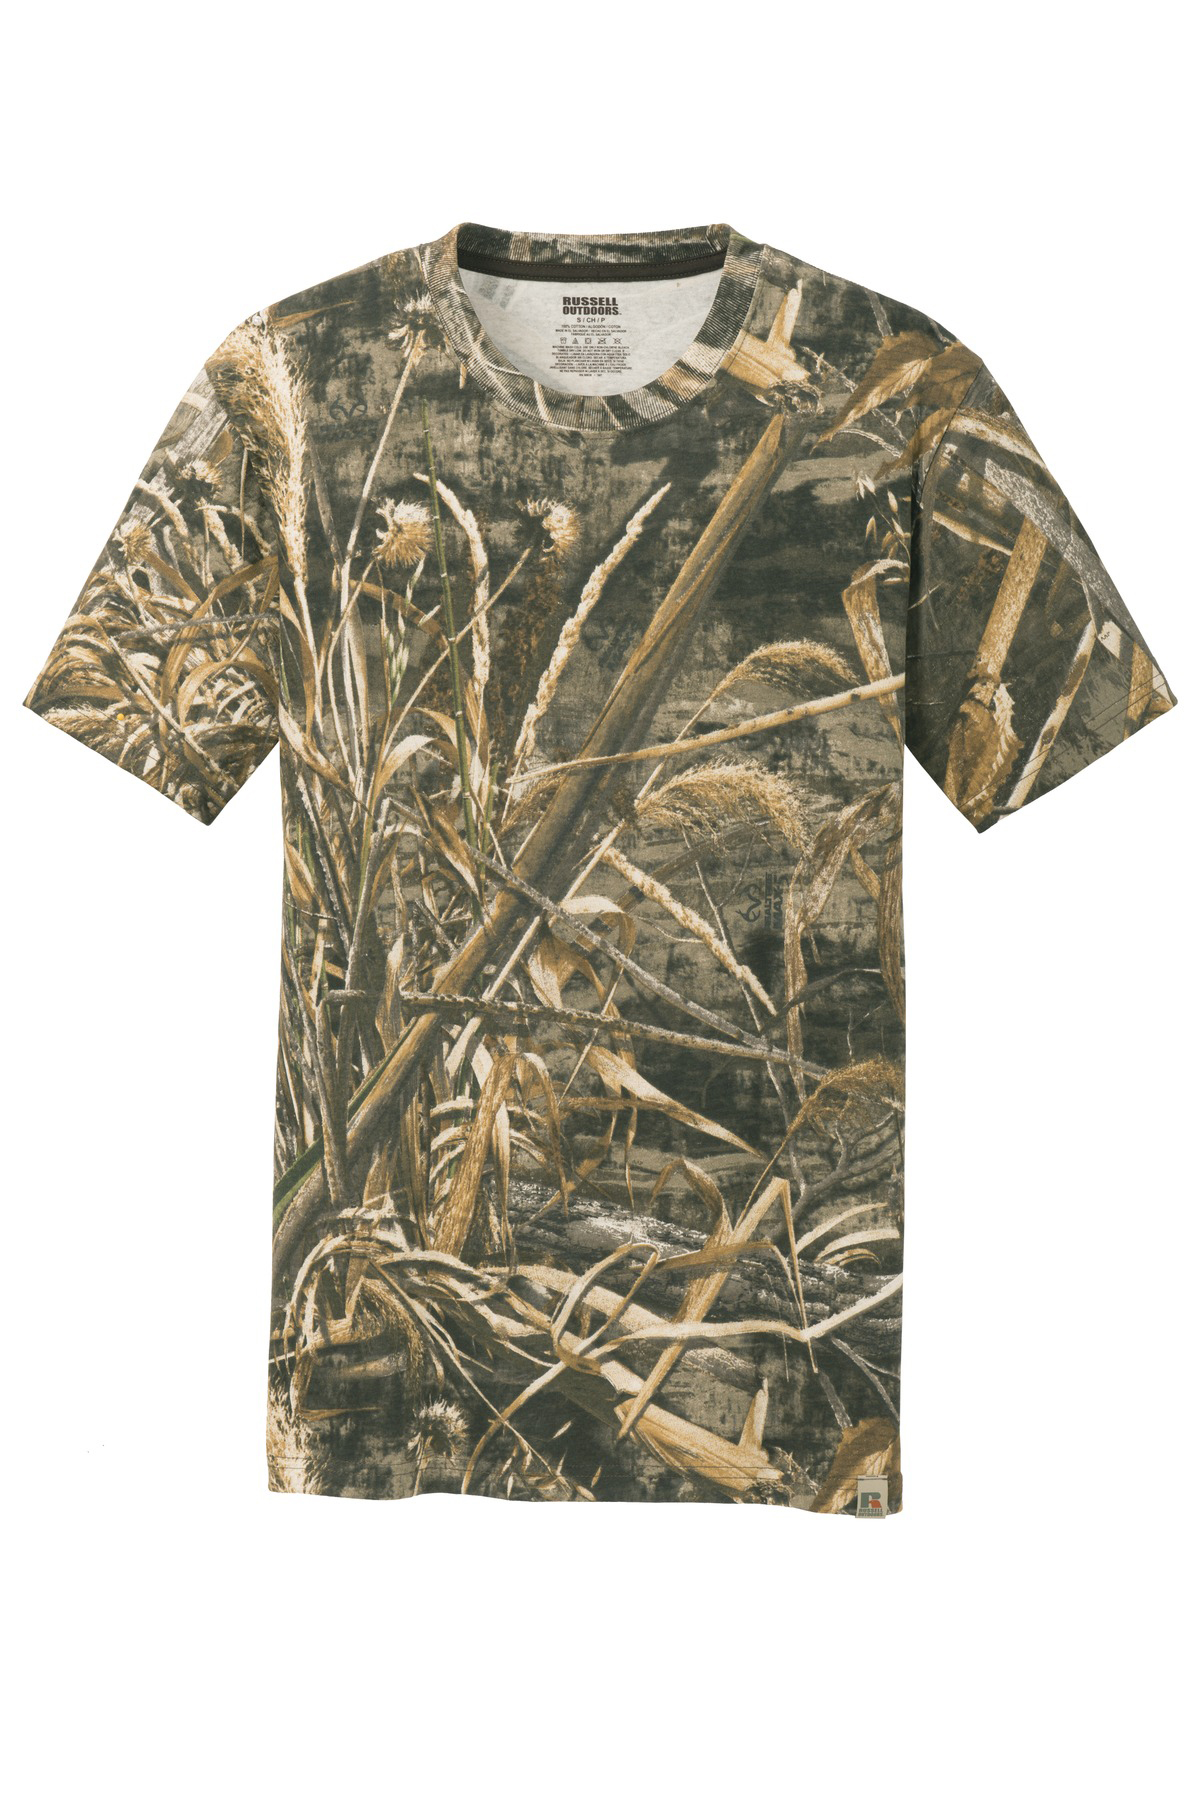 Russell Outdoors - Realtree Explorer 100% Cotton T-Shirt